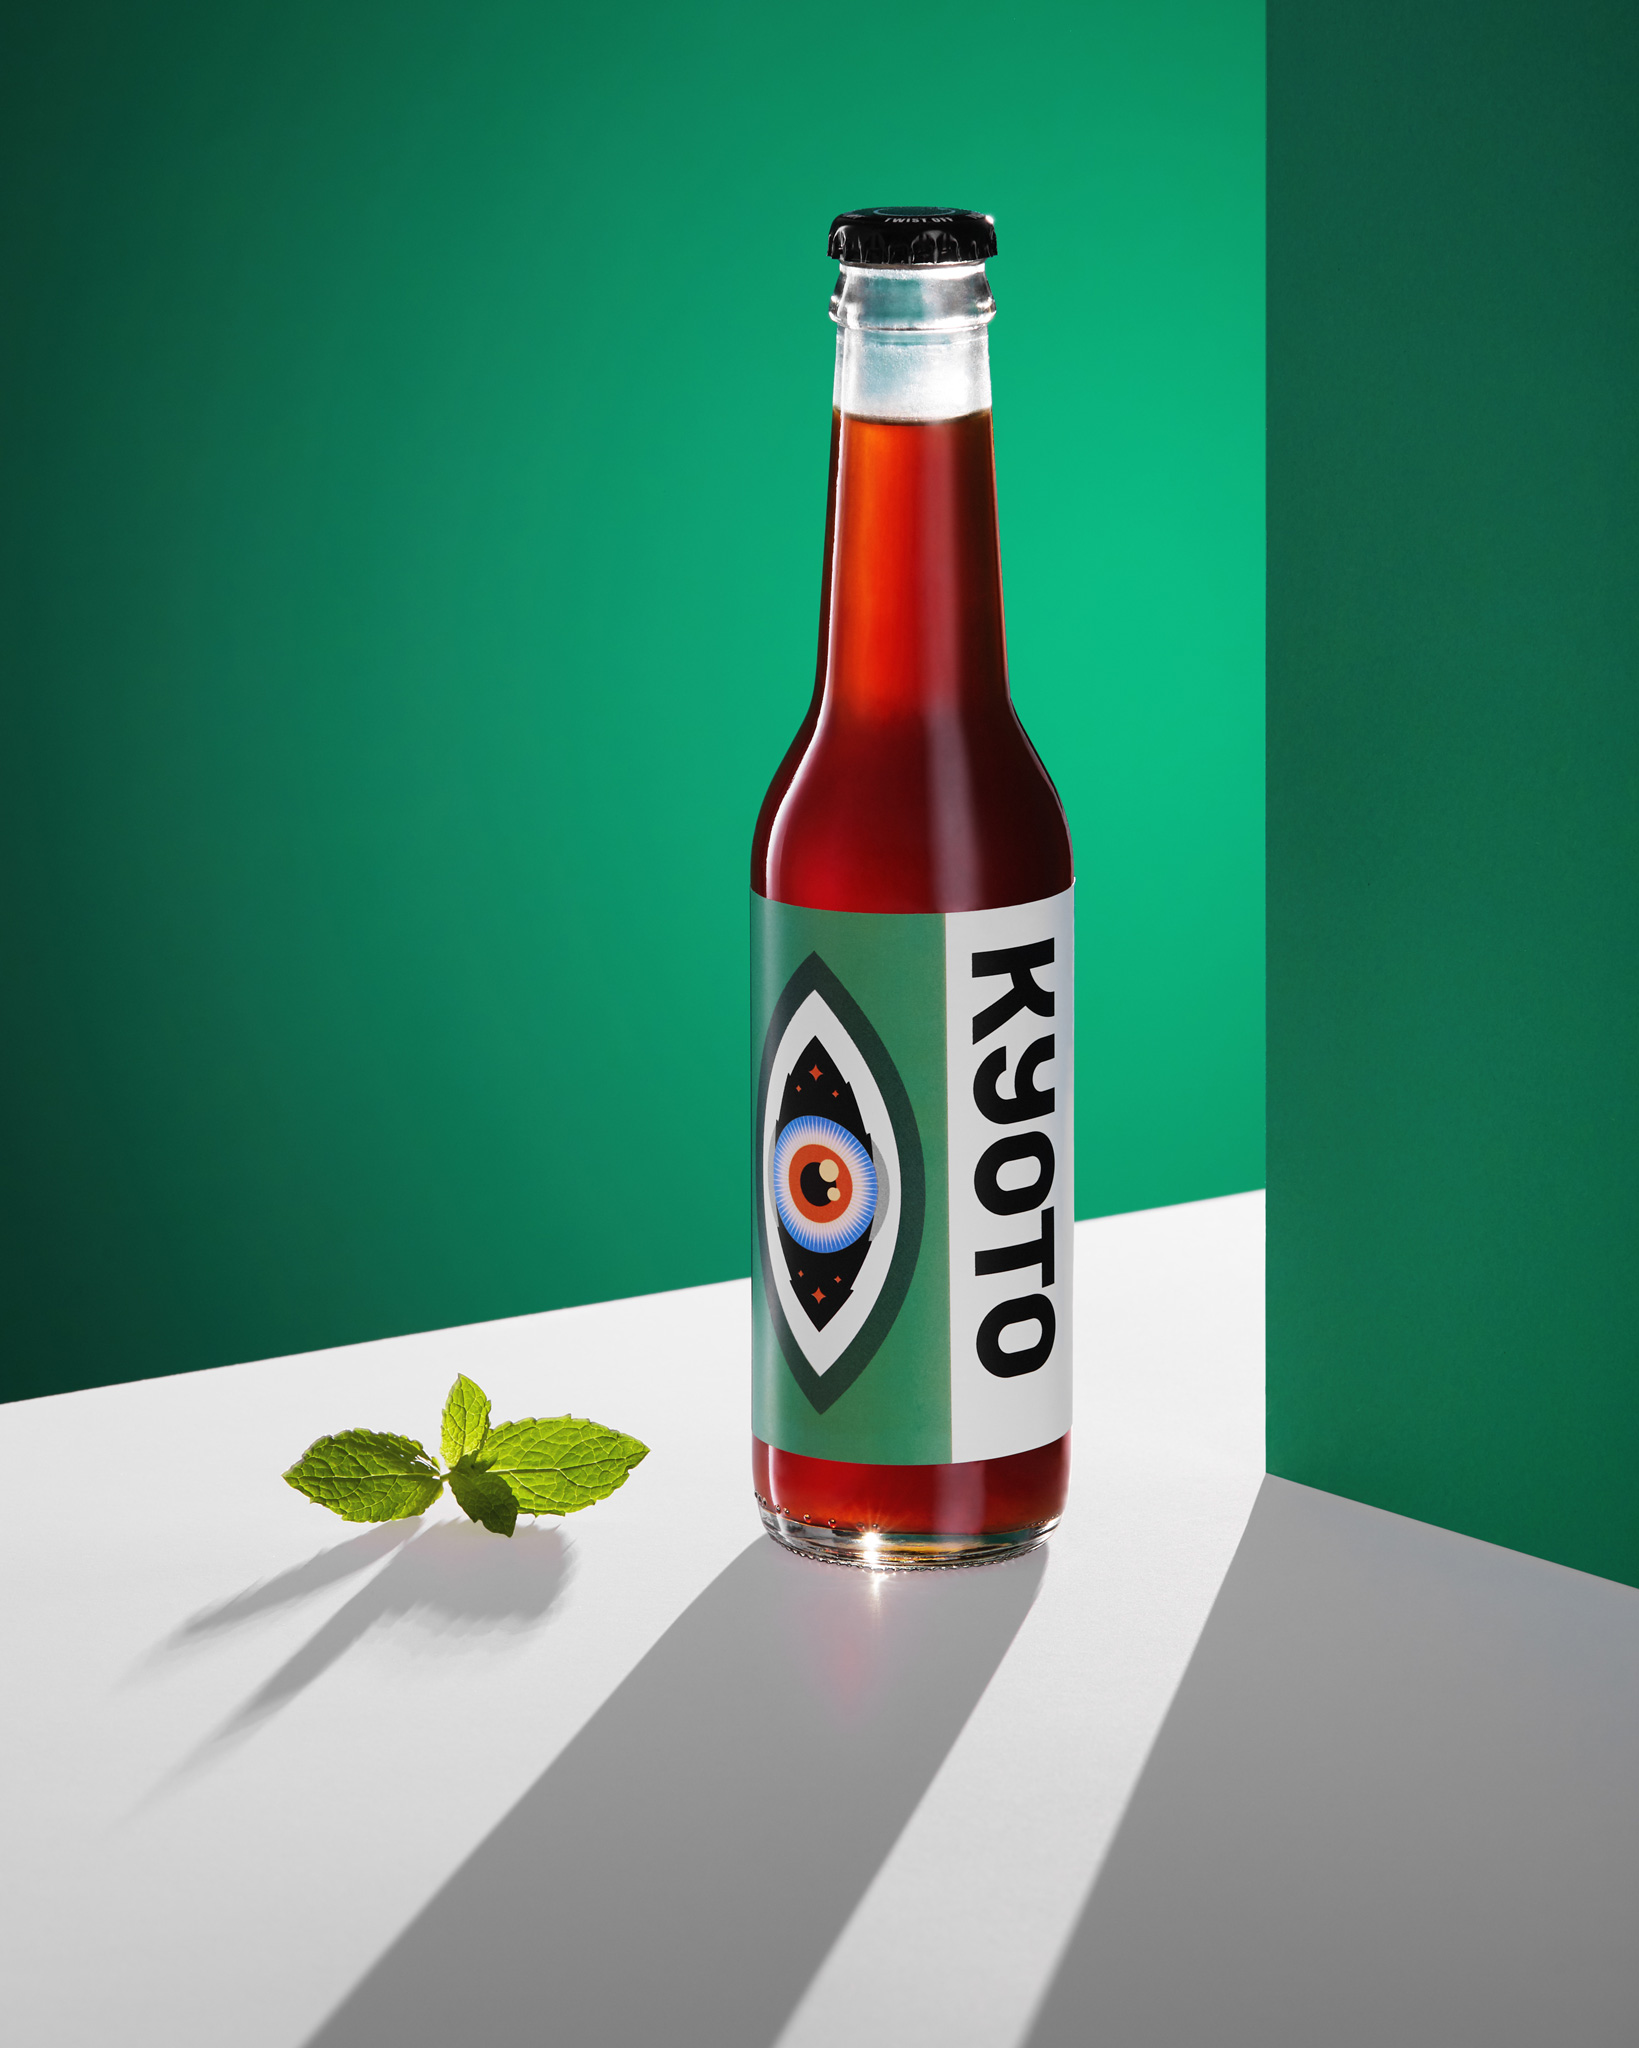 advertising photography of coffee drink in bottle on green backgroud